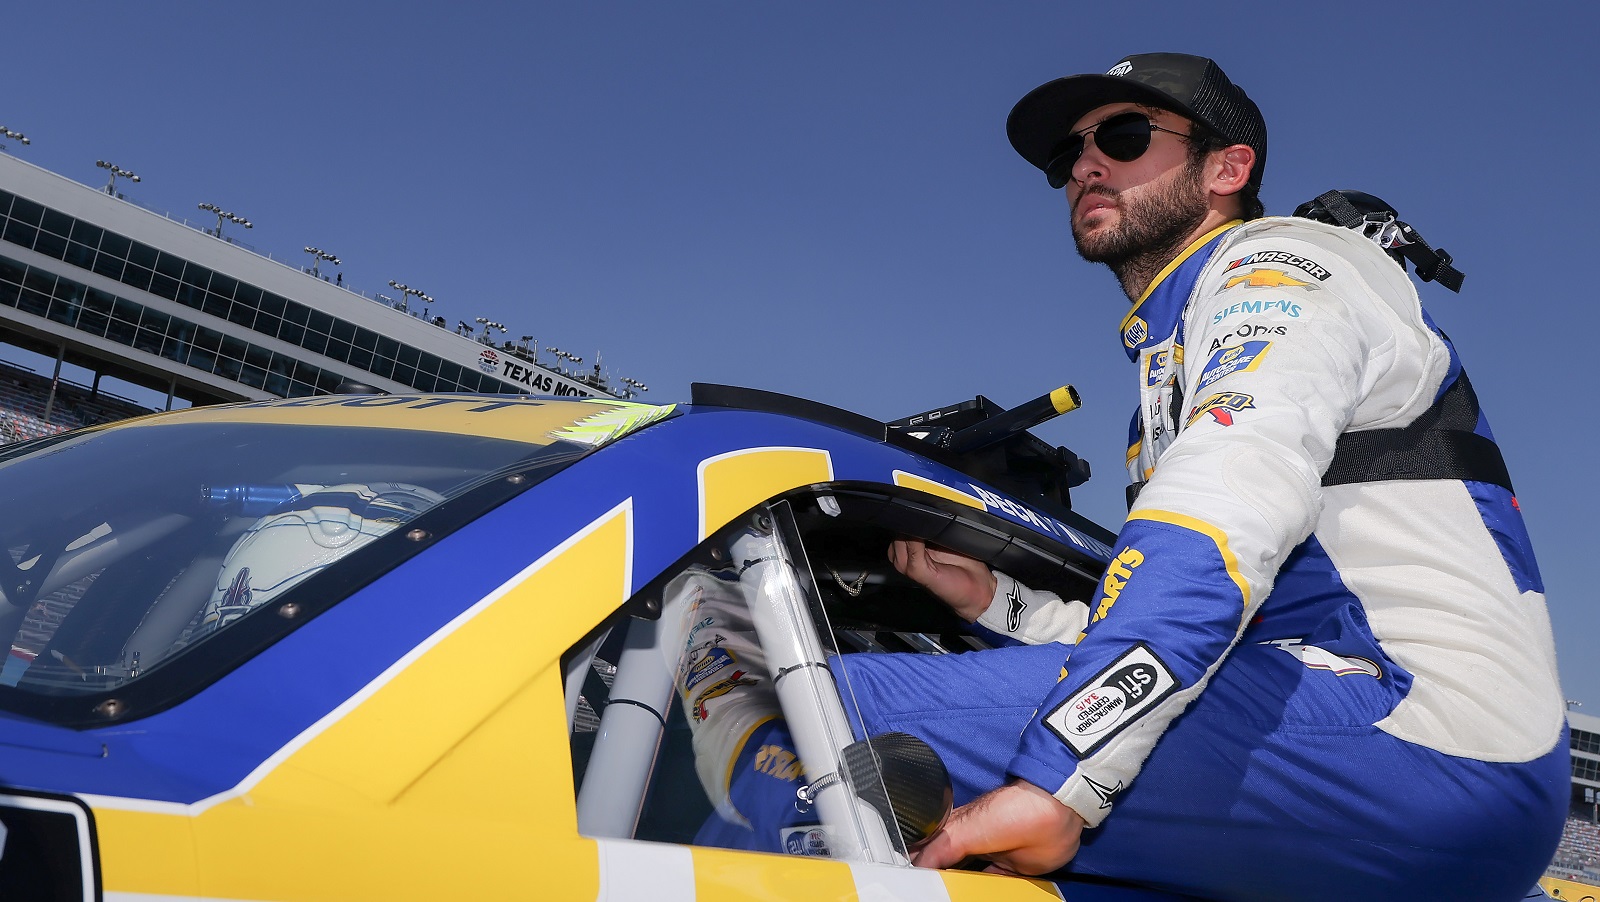 Chase Elliott enters his car during practice for the NASCAR Cup Series Auto Trader EchoPark Automotive 500 at Texas Motor Speedway on Sept. 24, 2022, in Fort Worth, Texas.